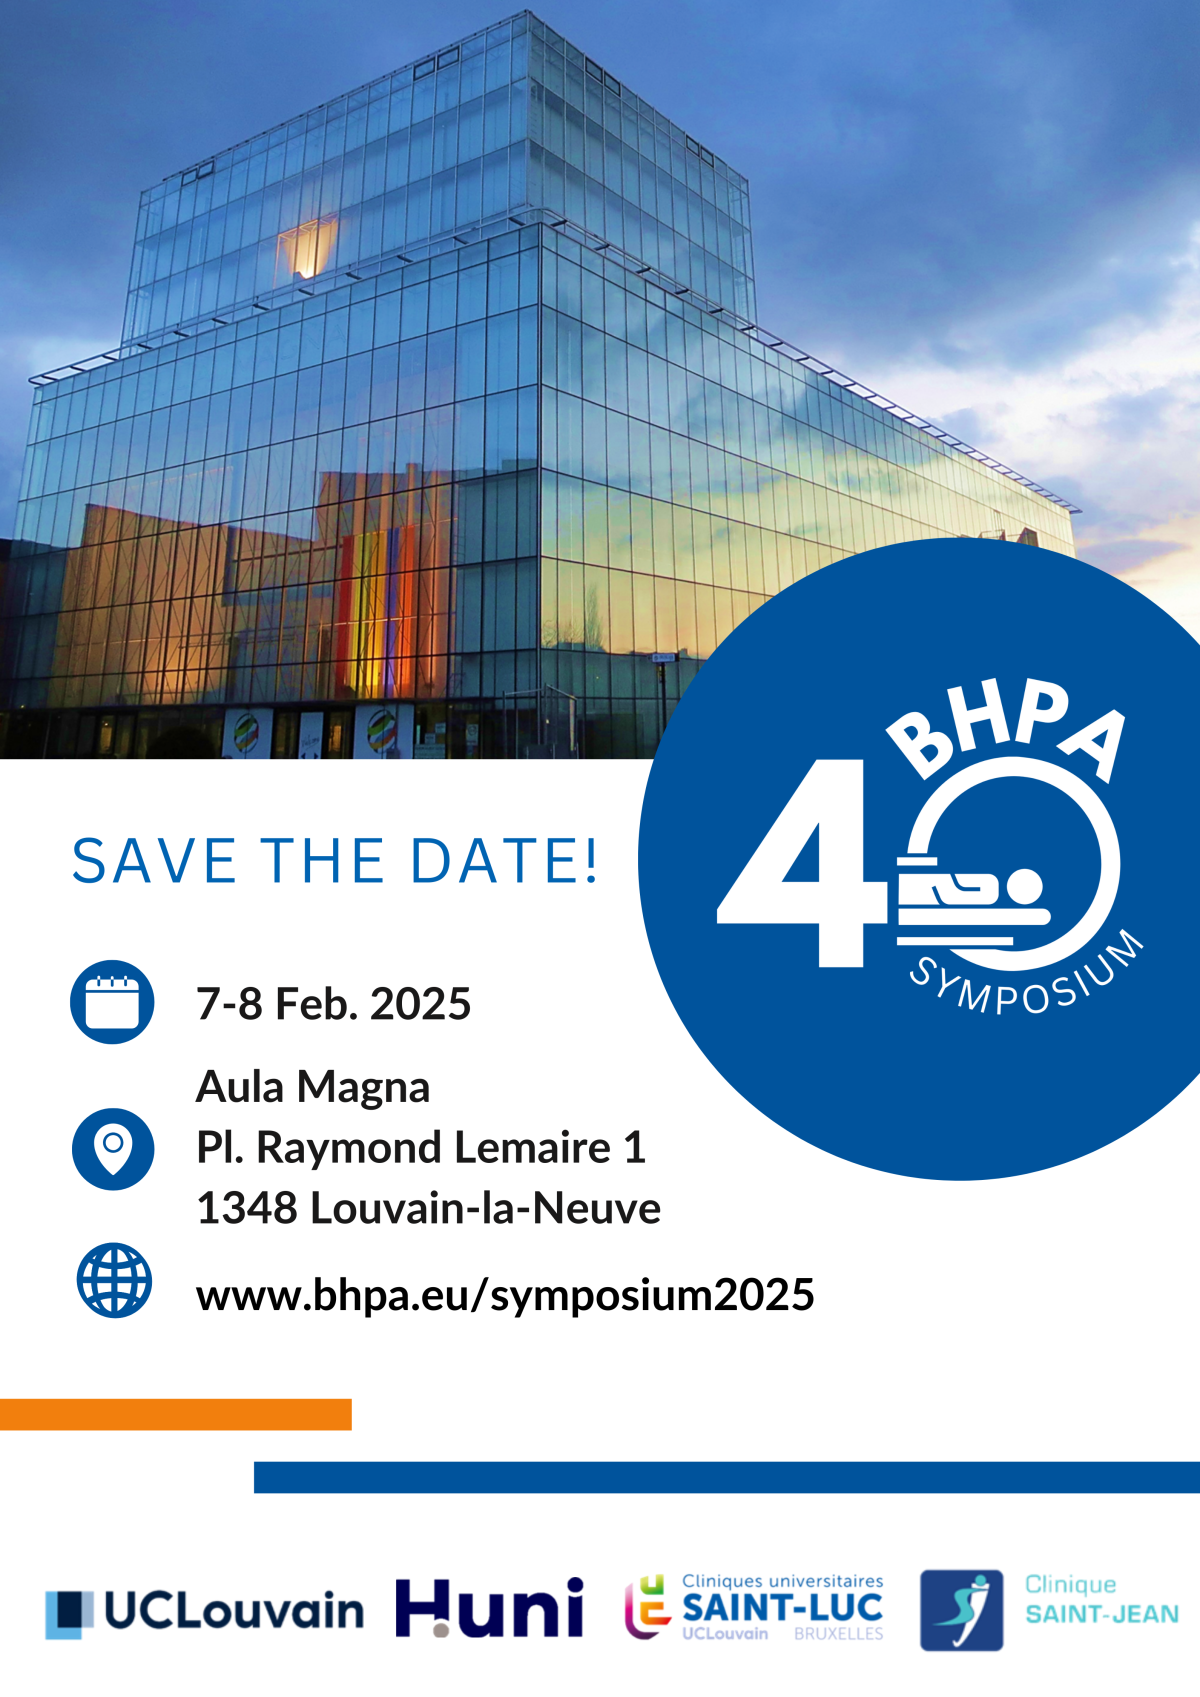 Save the date! 7-8 Feb. 2025